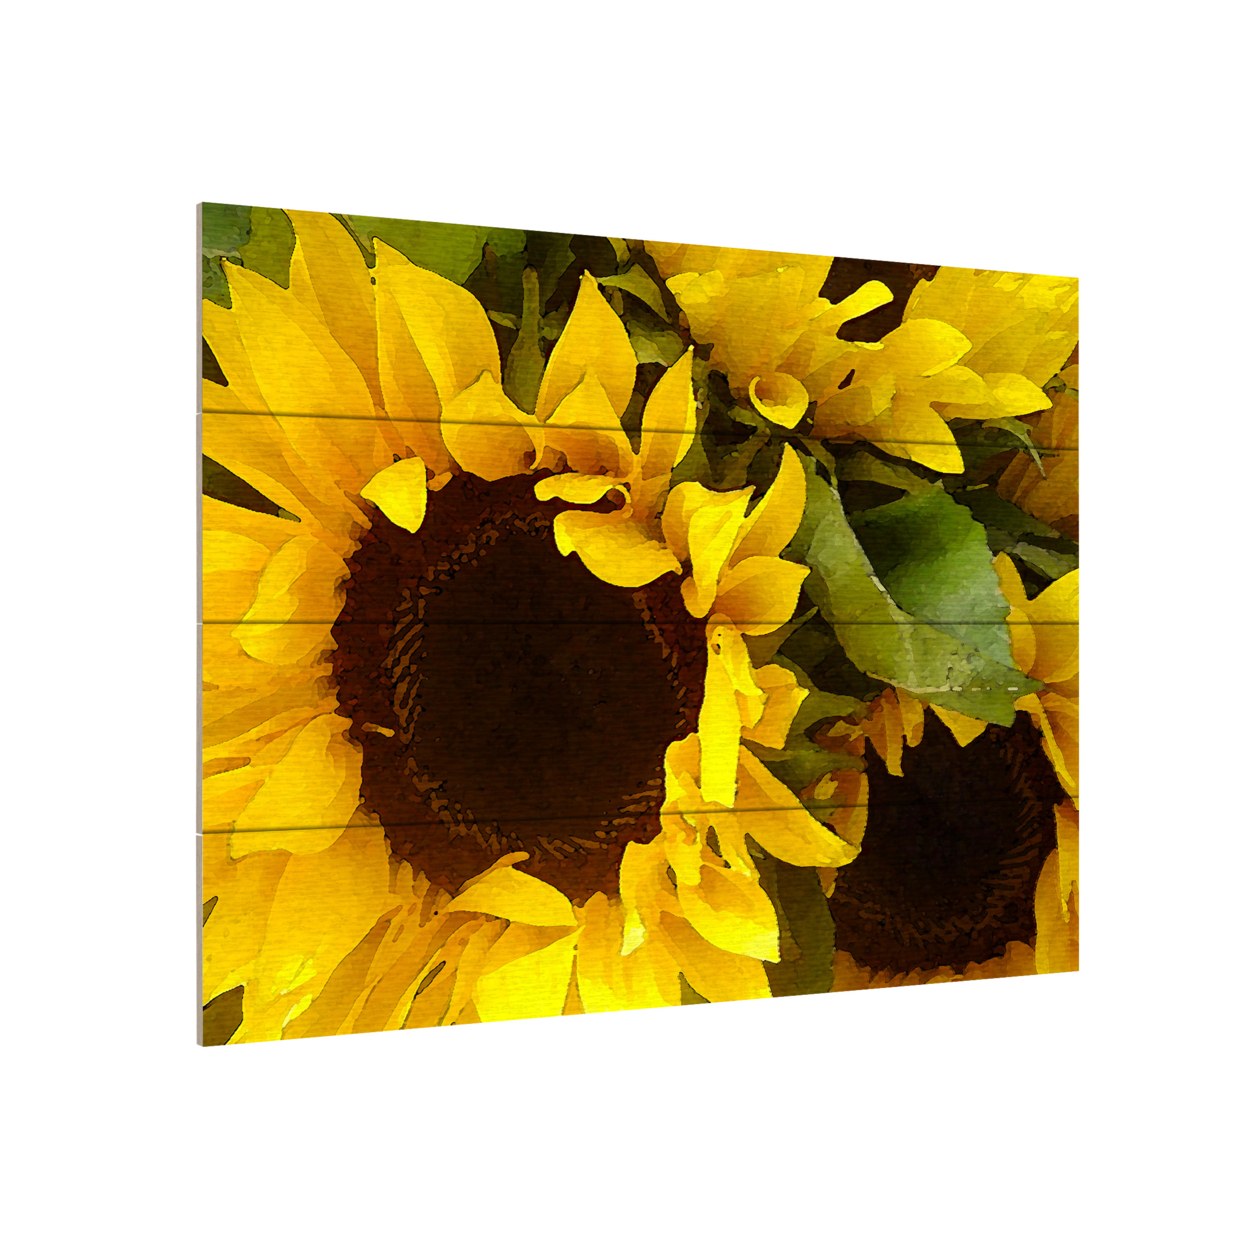 Wall Art 12 X 16 Inches Titled Sunflowers Ready To Hang Printed On Wooden Planks